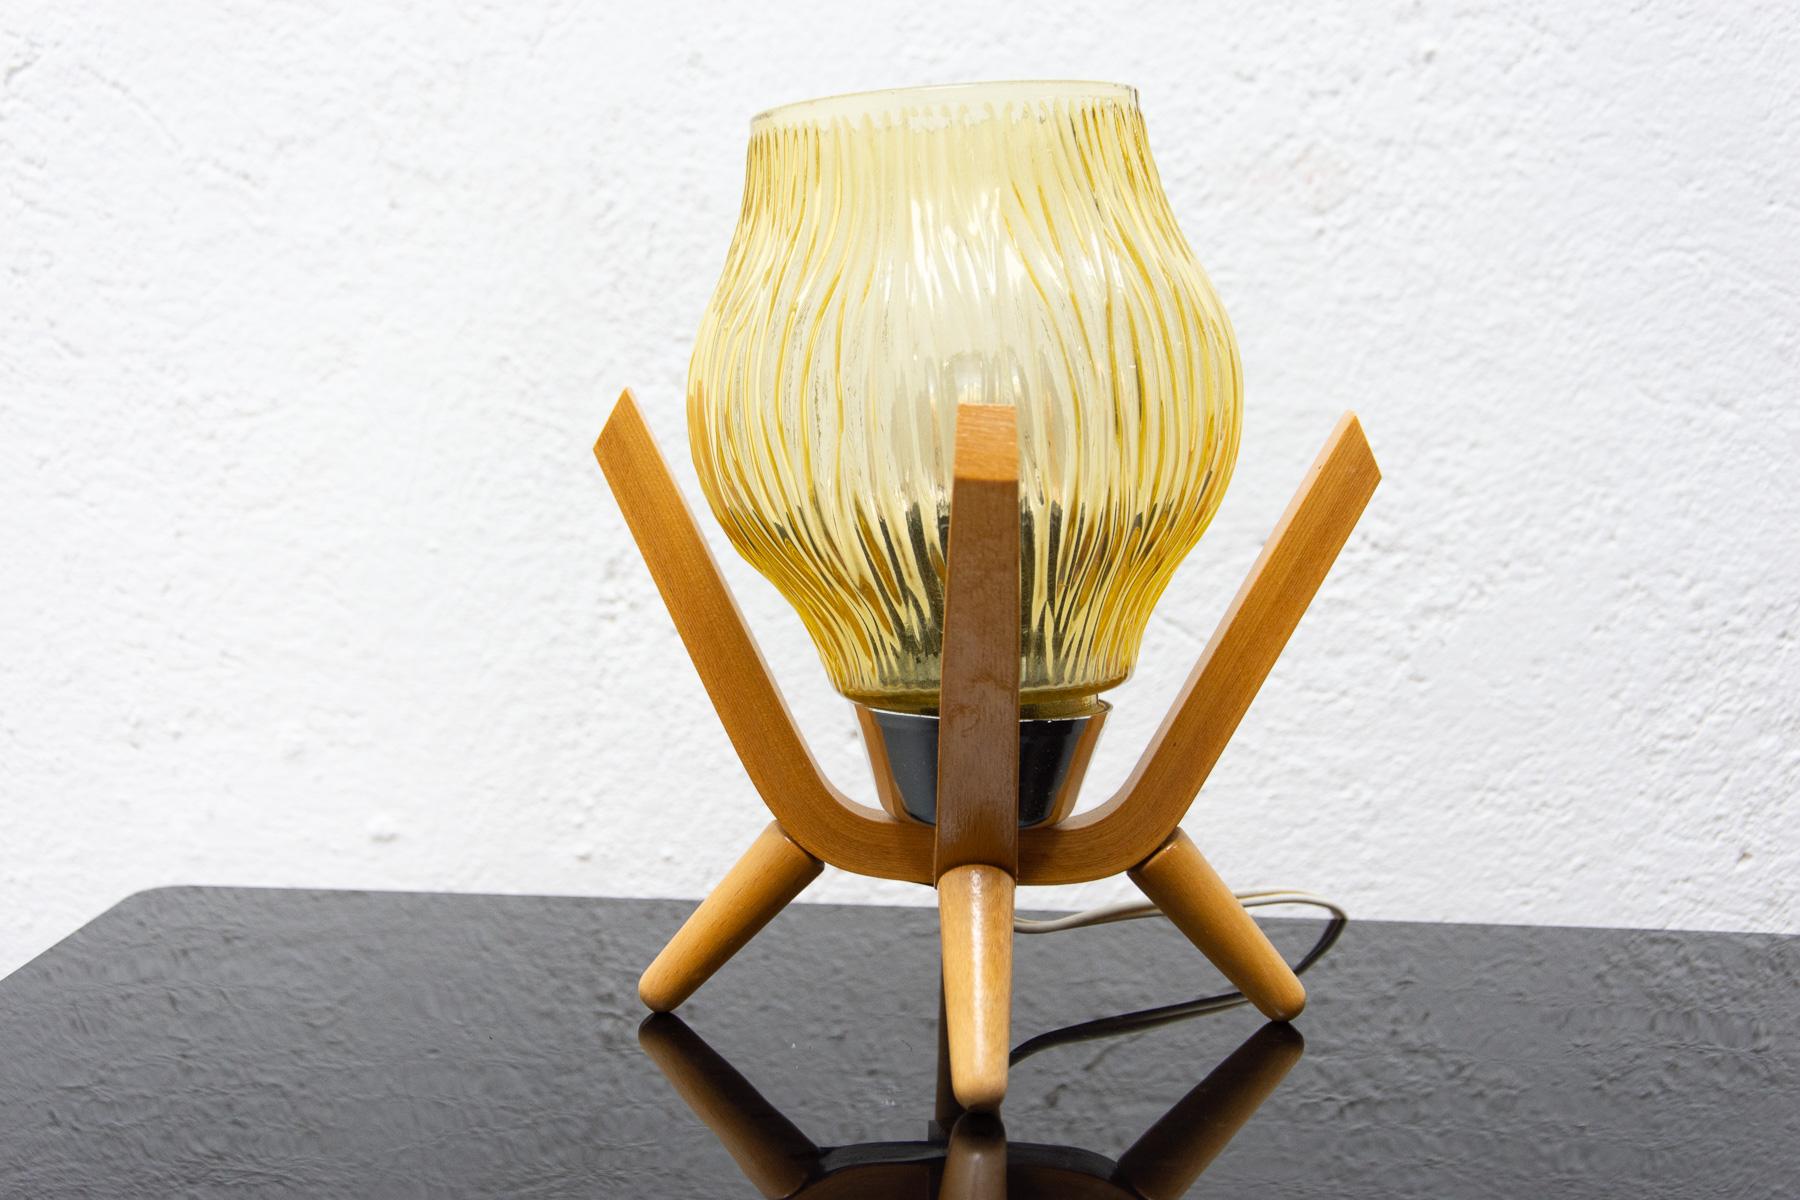 This mid century table lamp was made by the Czechoslovak company Drevo Humpolec in the 1960s.
The lamp has a wooden base and a glass shade.
It’s in very good vintage condition, fully functional.
 